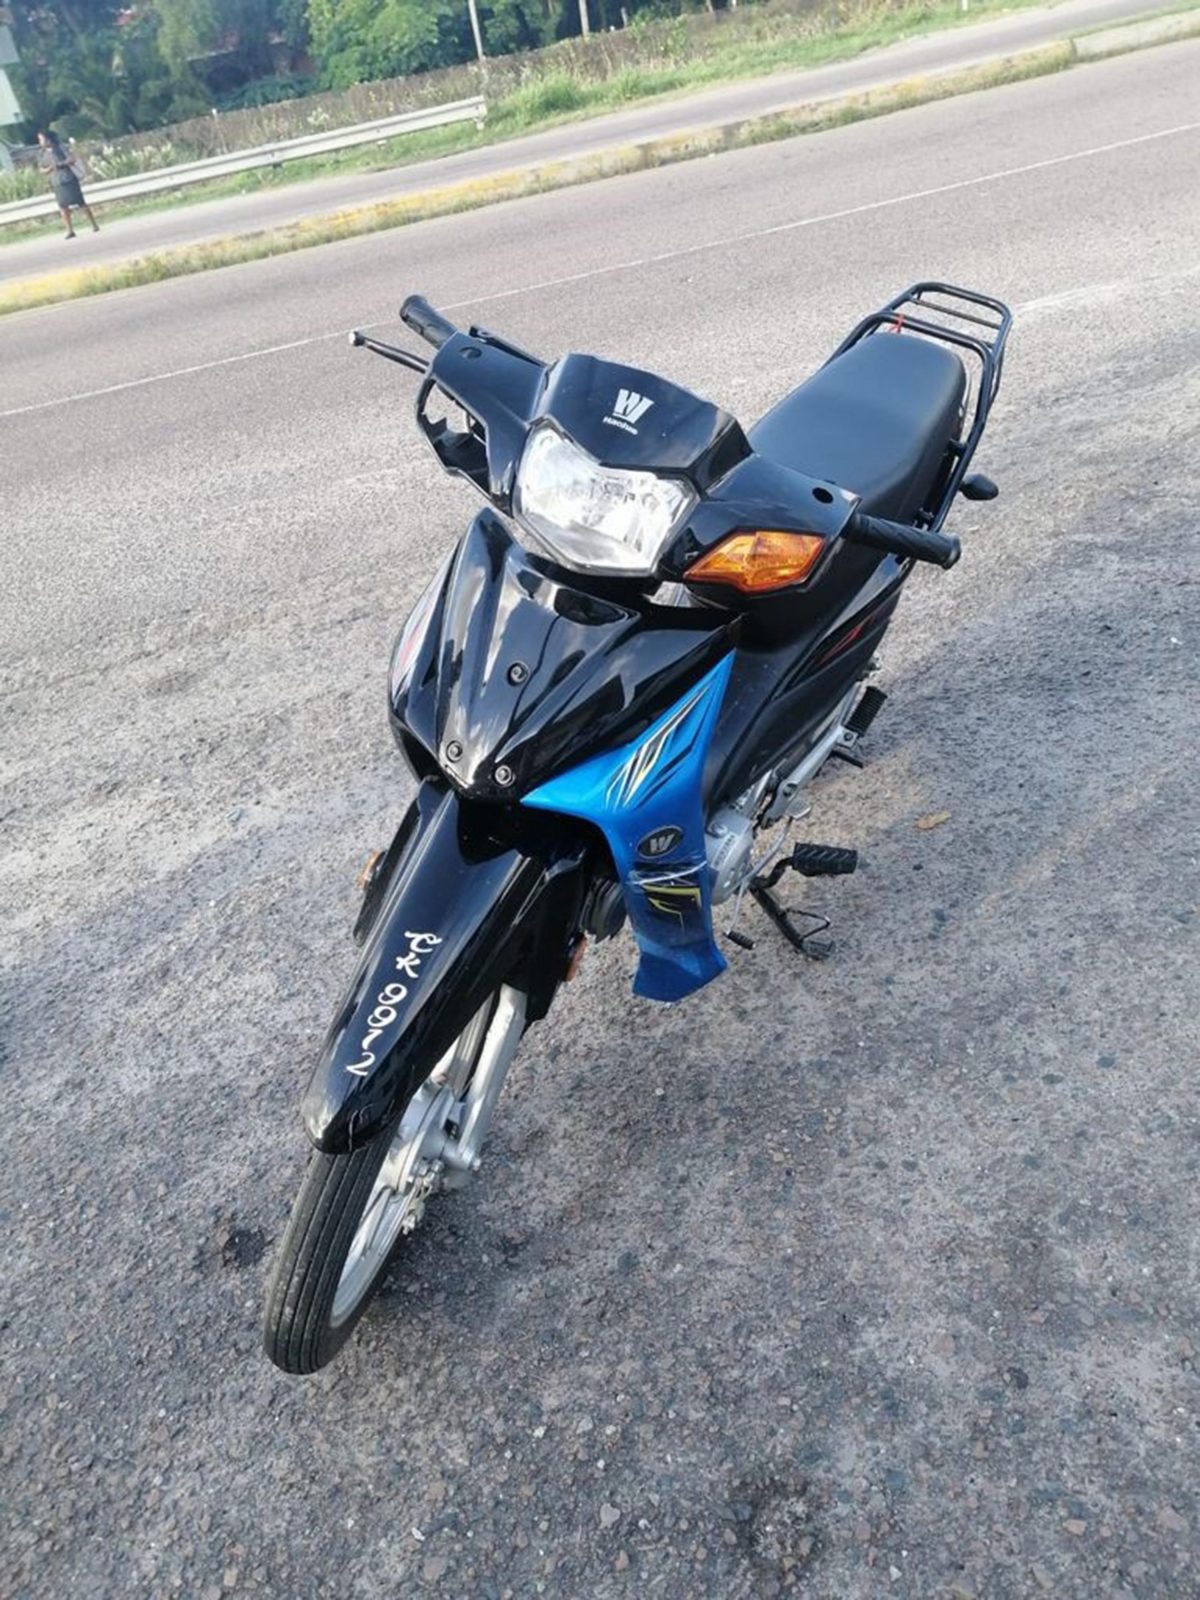 One of the motorcycles used by the suspected gang
